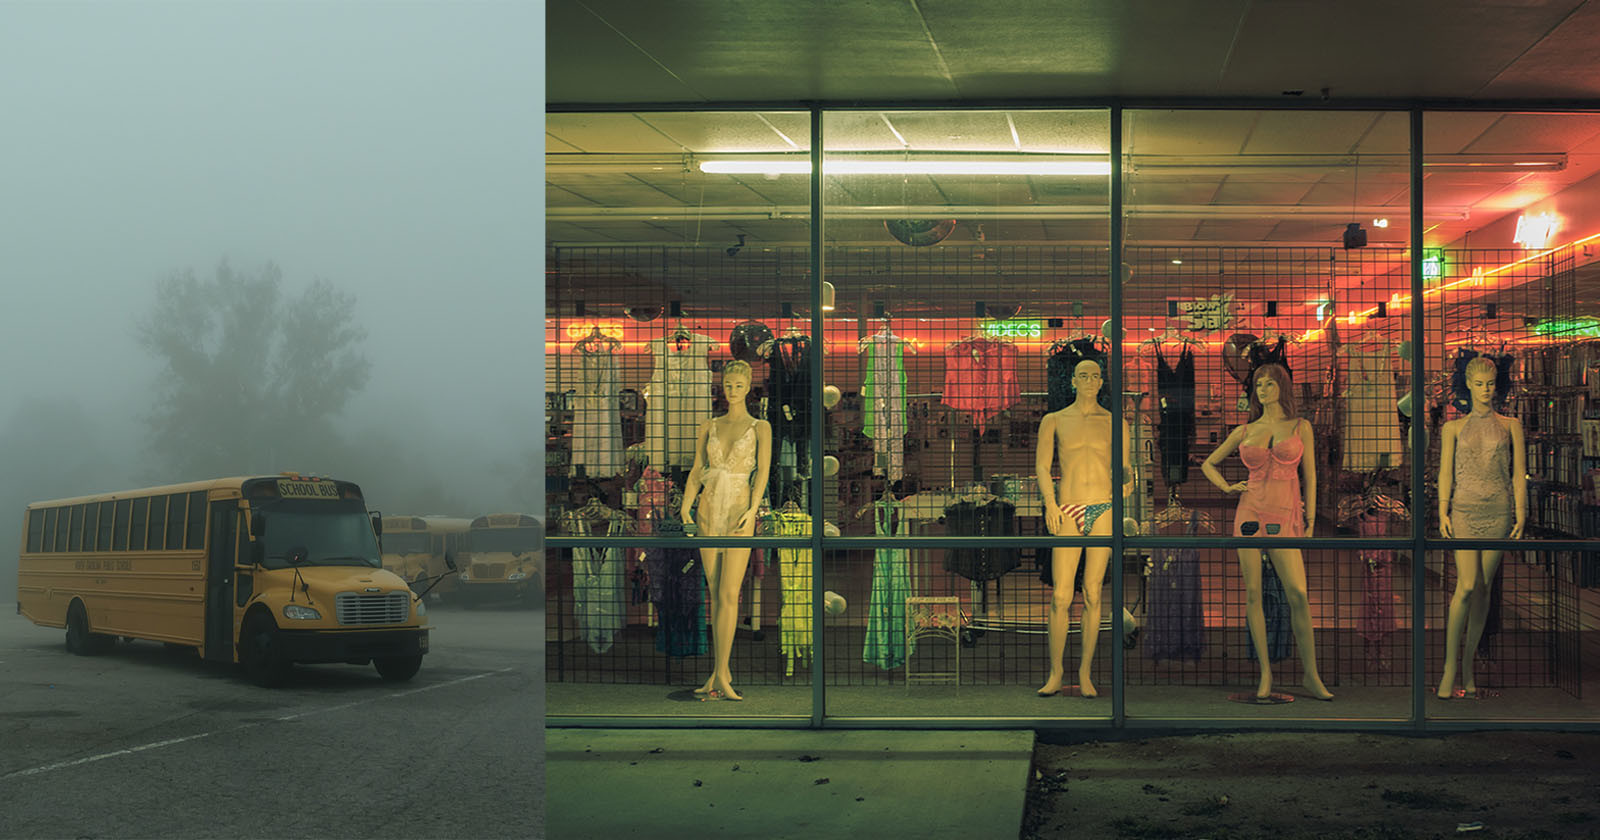  photographer finds beauty his ordinary hometown 